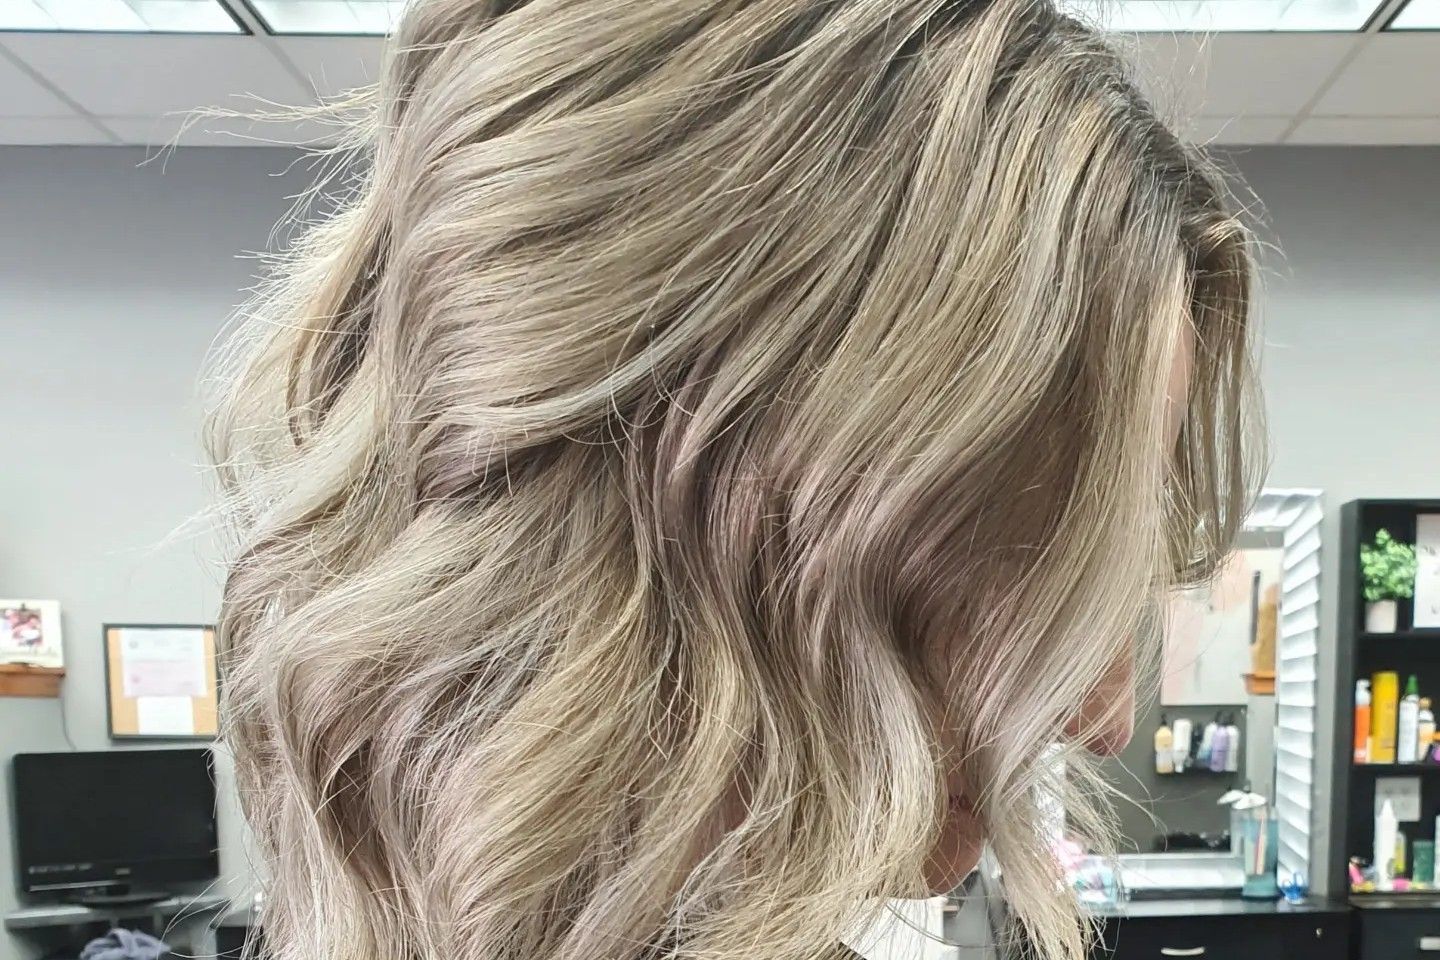 Hair By Michelle - Sioux Falls - Book Online - Prices, Reviews, Photos